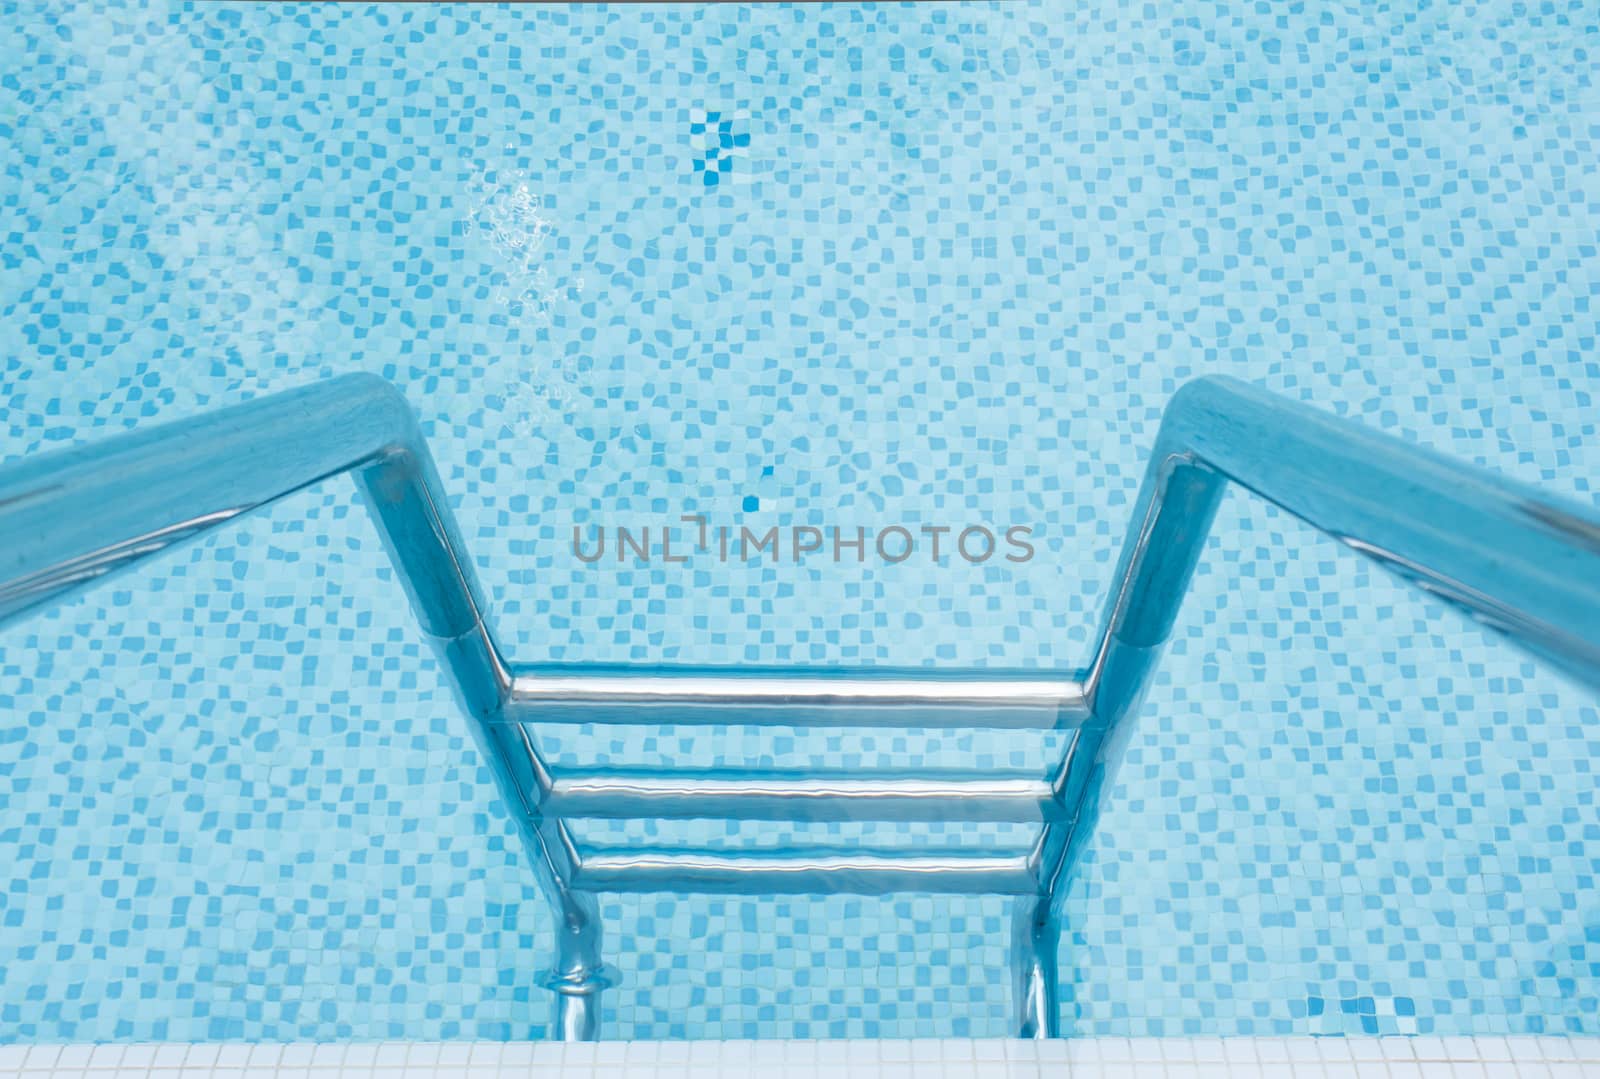 Swimming pool stairway and pattern of water